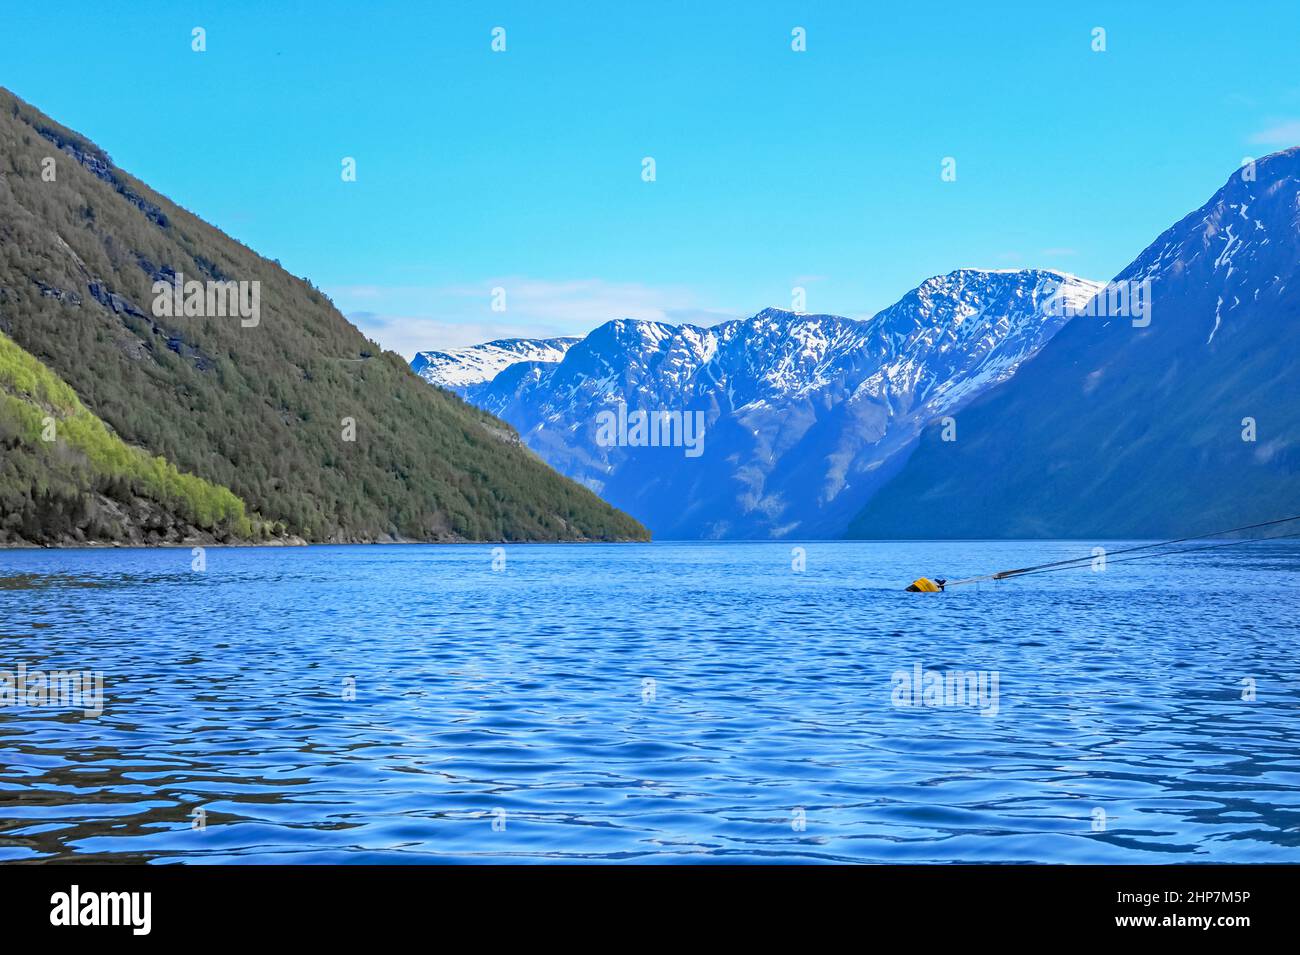 A view along the fjord over the blue waters to the snow capped mountains Stock Photo